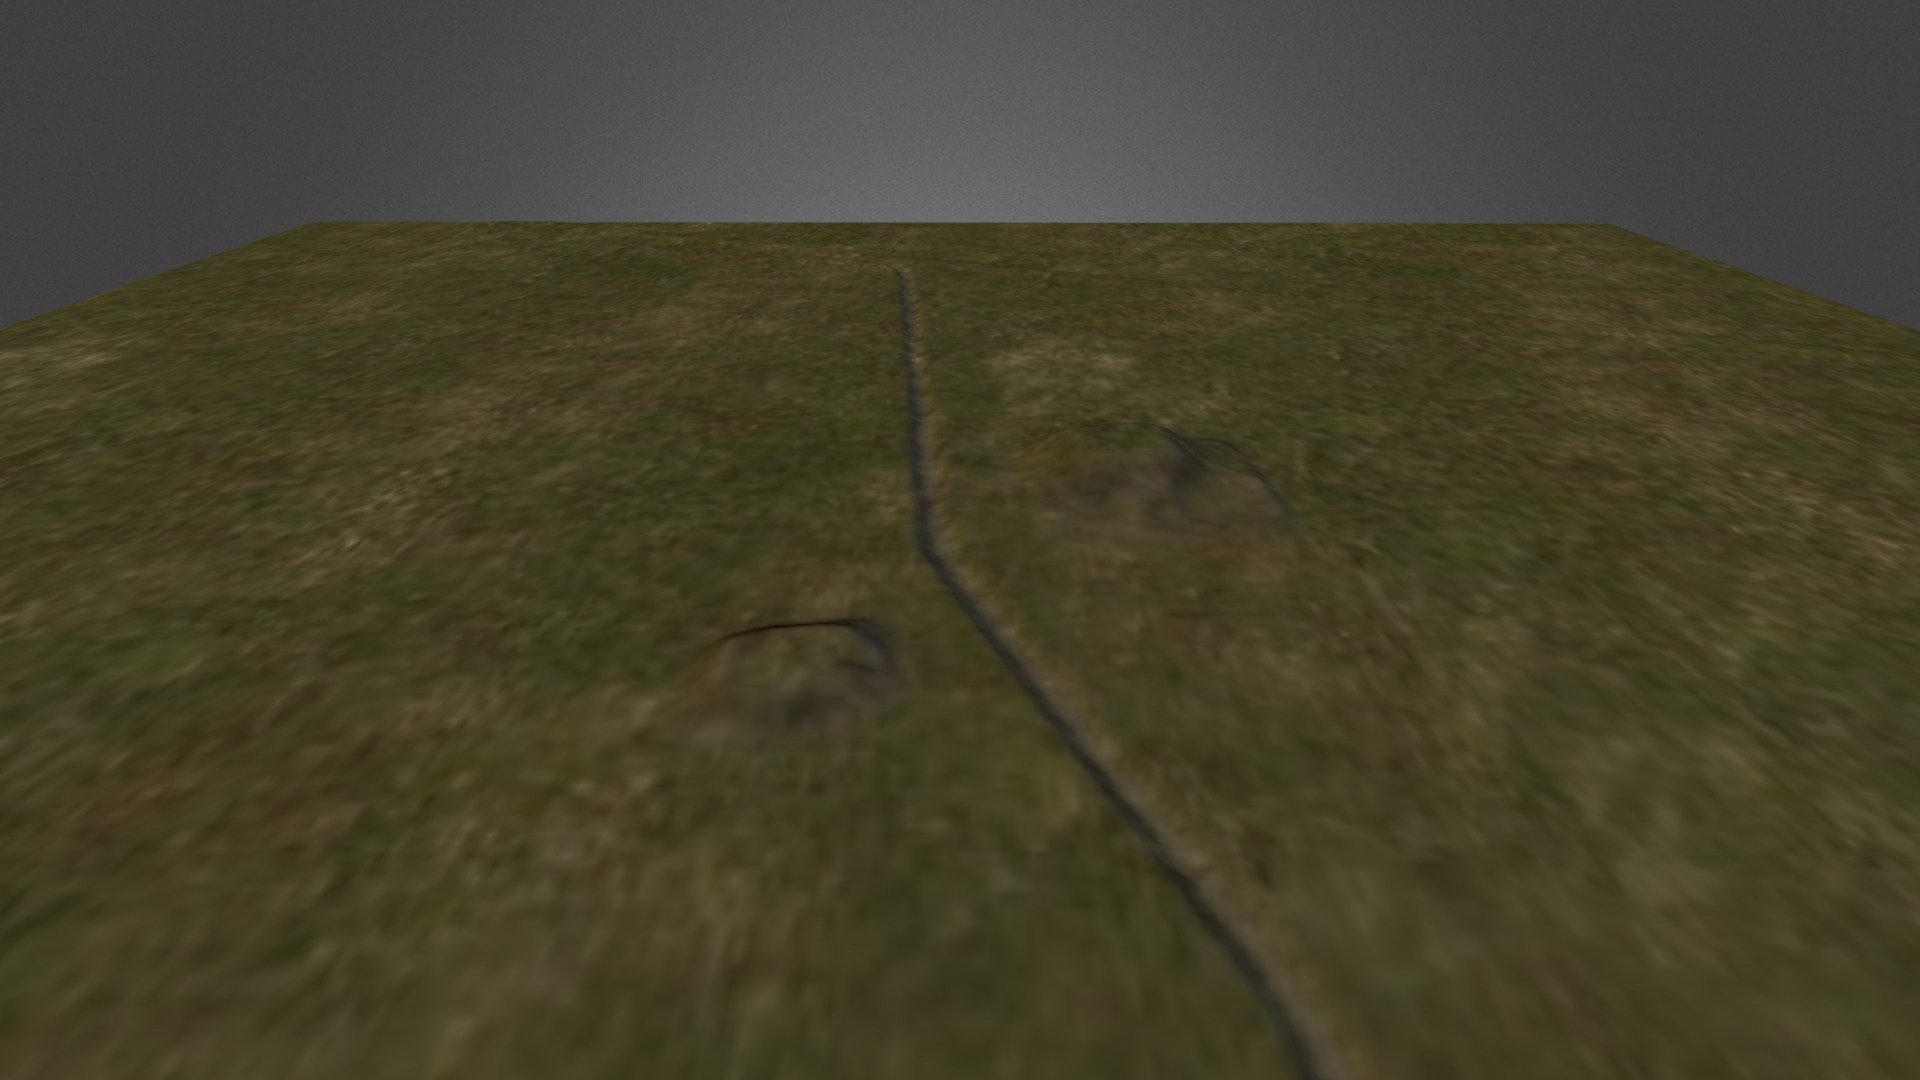 Simple terrain model of Magee Mound site in Mississippi. Created in L3DT from DEM data exported from ArcMap 3d model